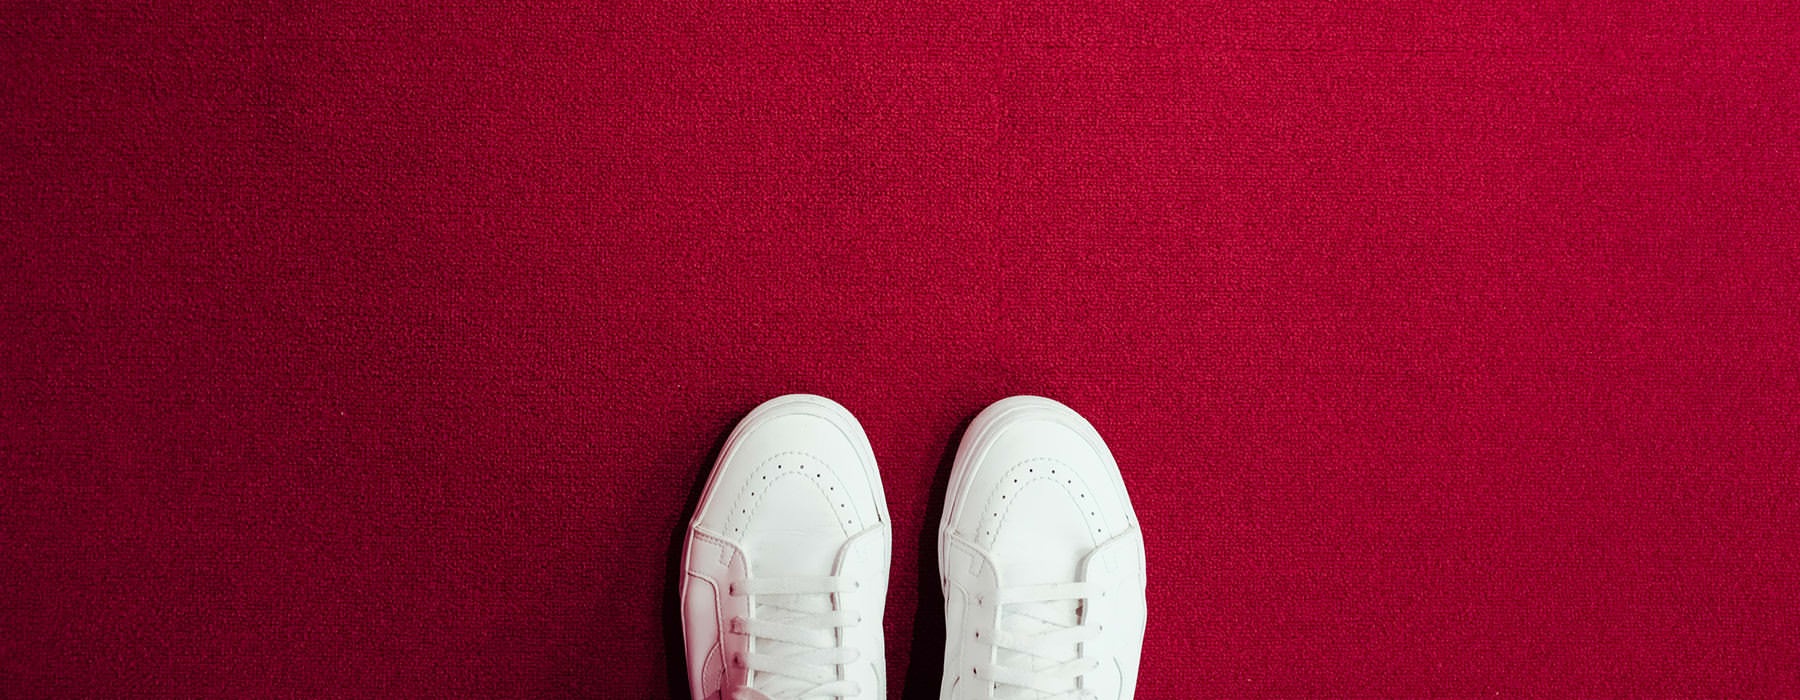 white shoes on red carpet